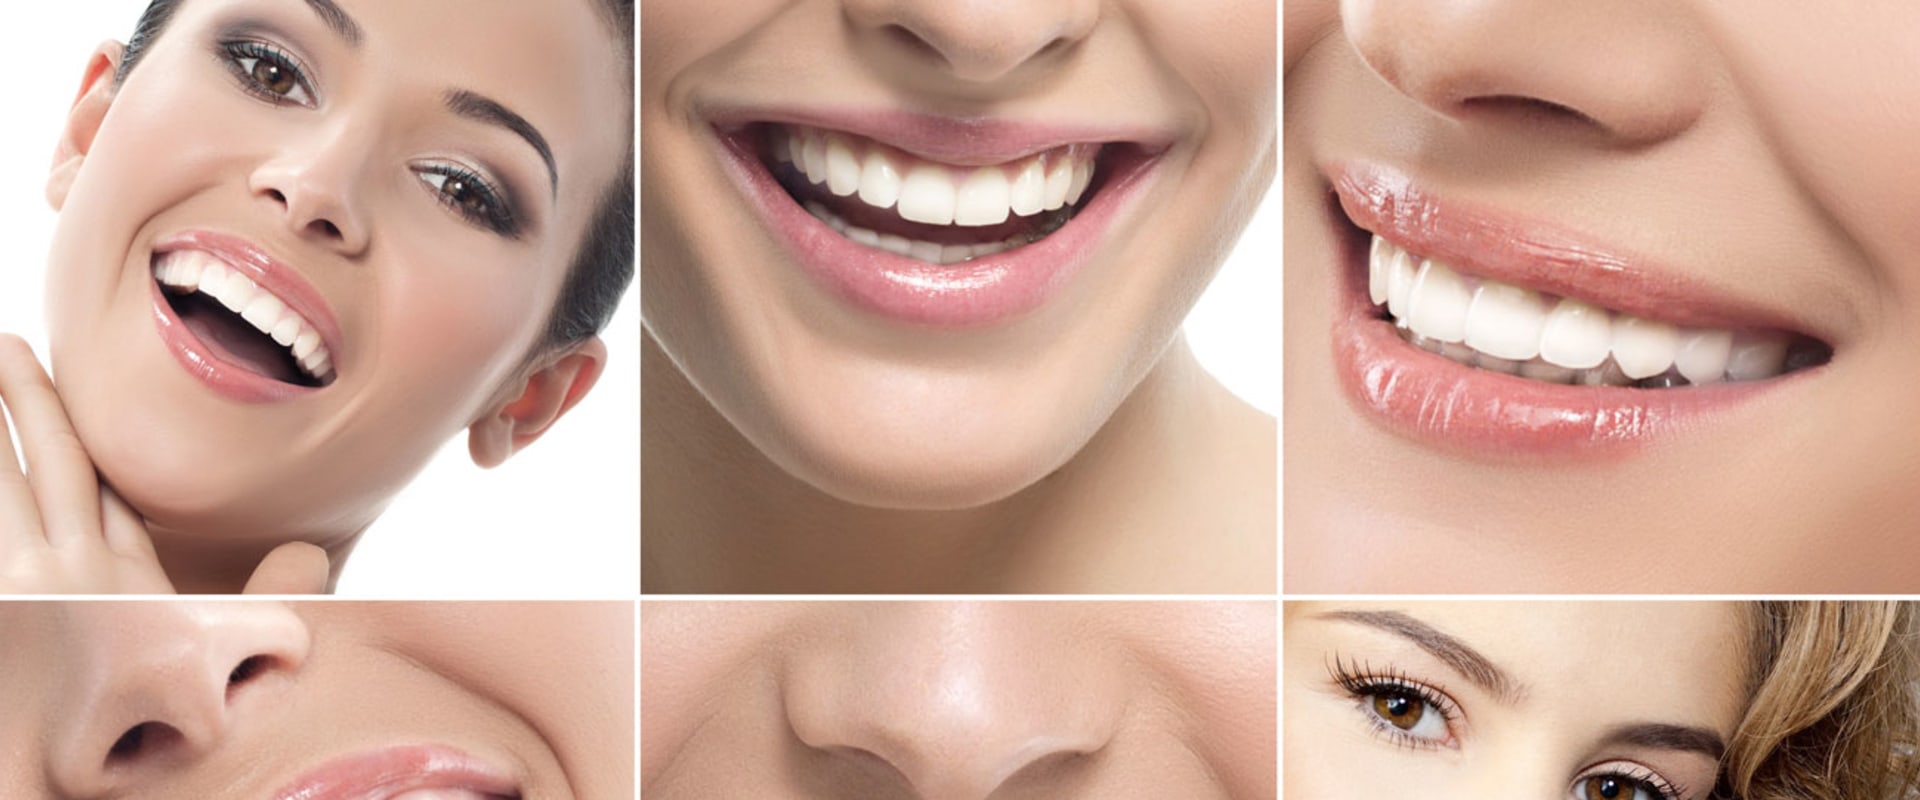 Where Do Prosthodontists Work? An Expert's Guide